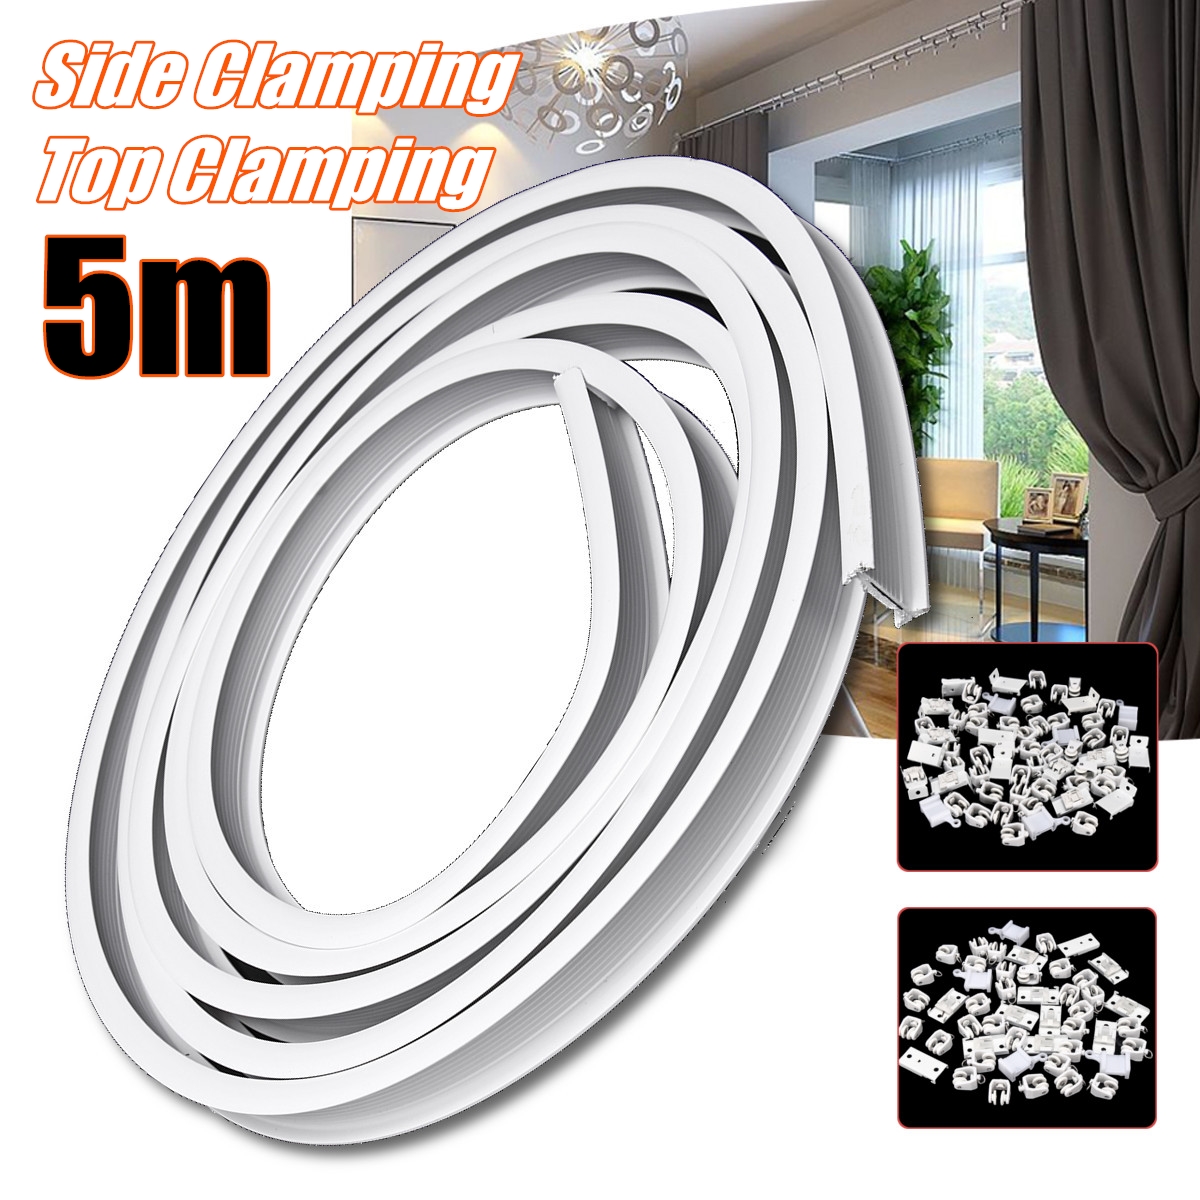 5M-Curtains-Track-Rail-Flexible-Ceiling-Mounted-For-Straight-Slide-Window-Balcony-1349665-1